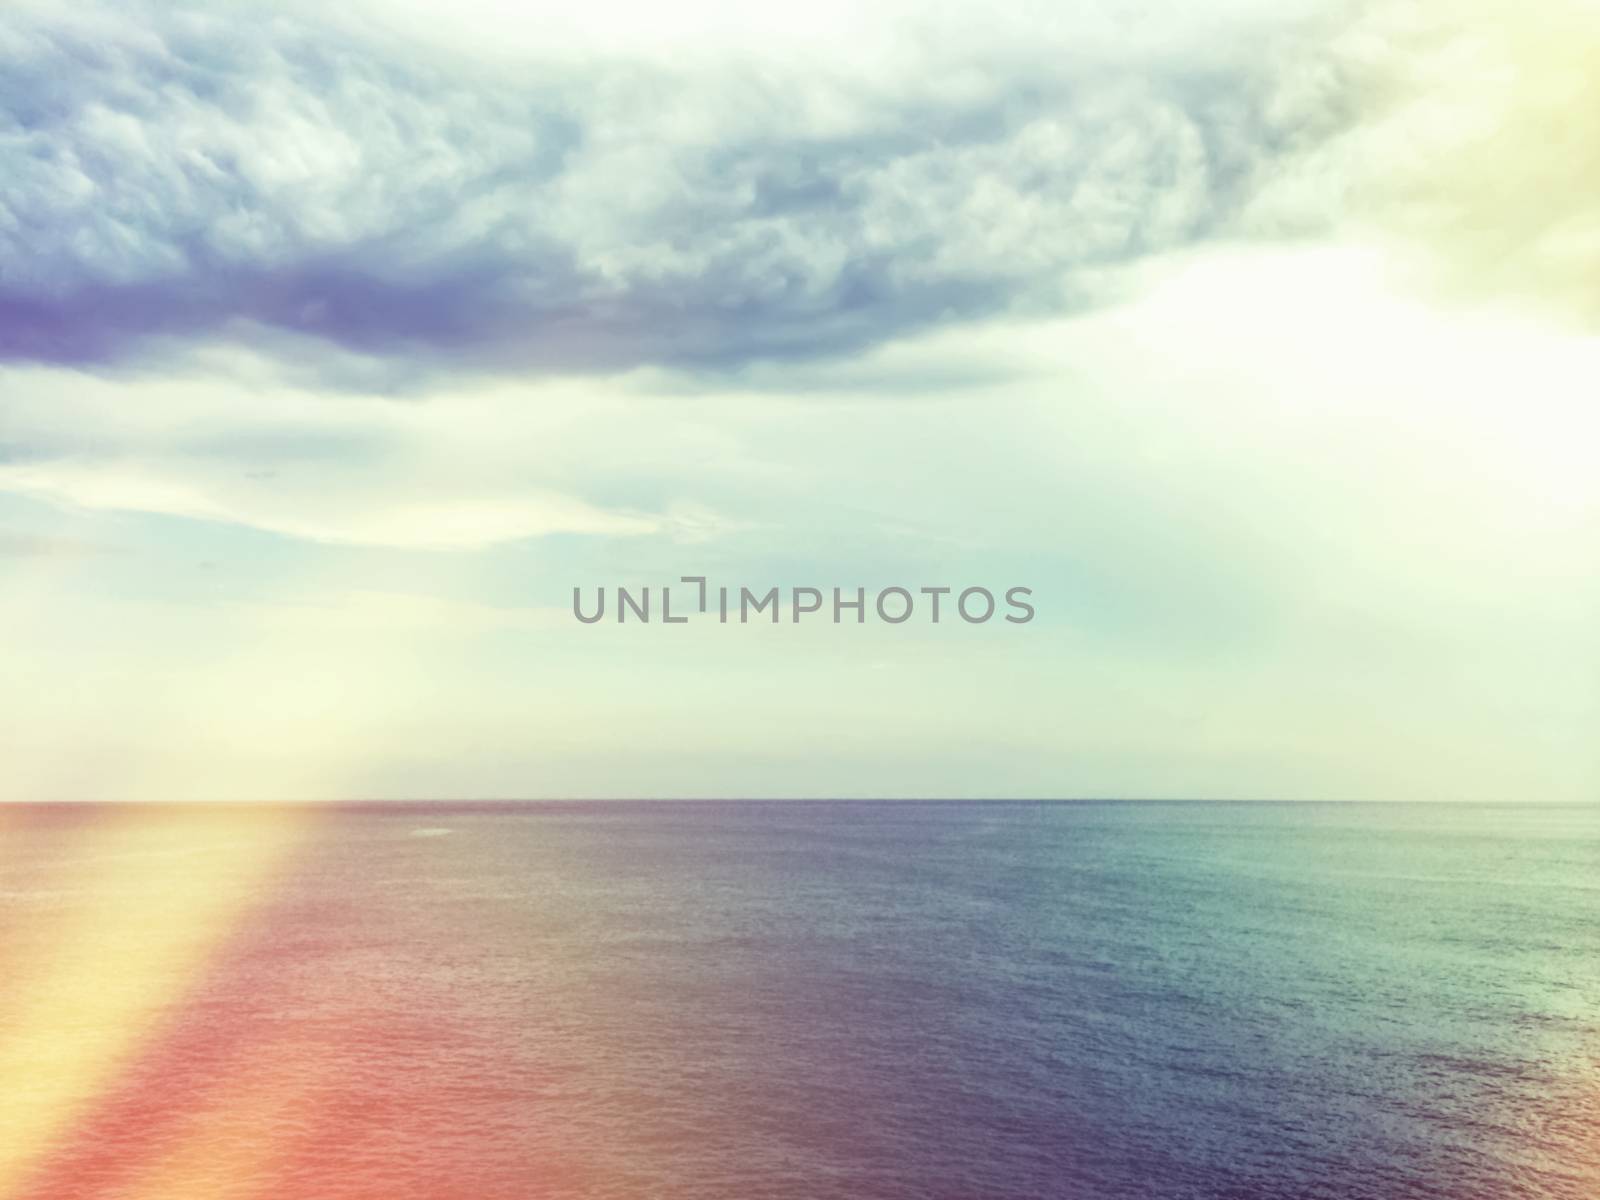 Retro style image of sea and clouds. Light leaks effect.